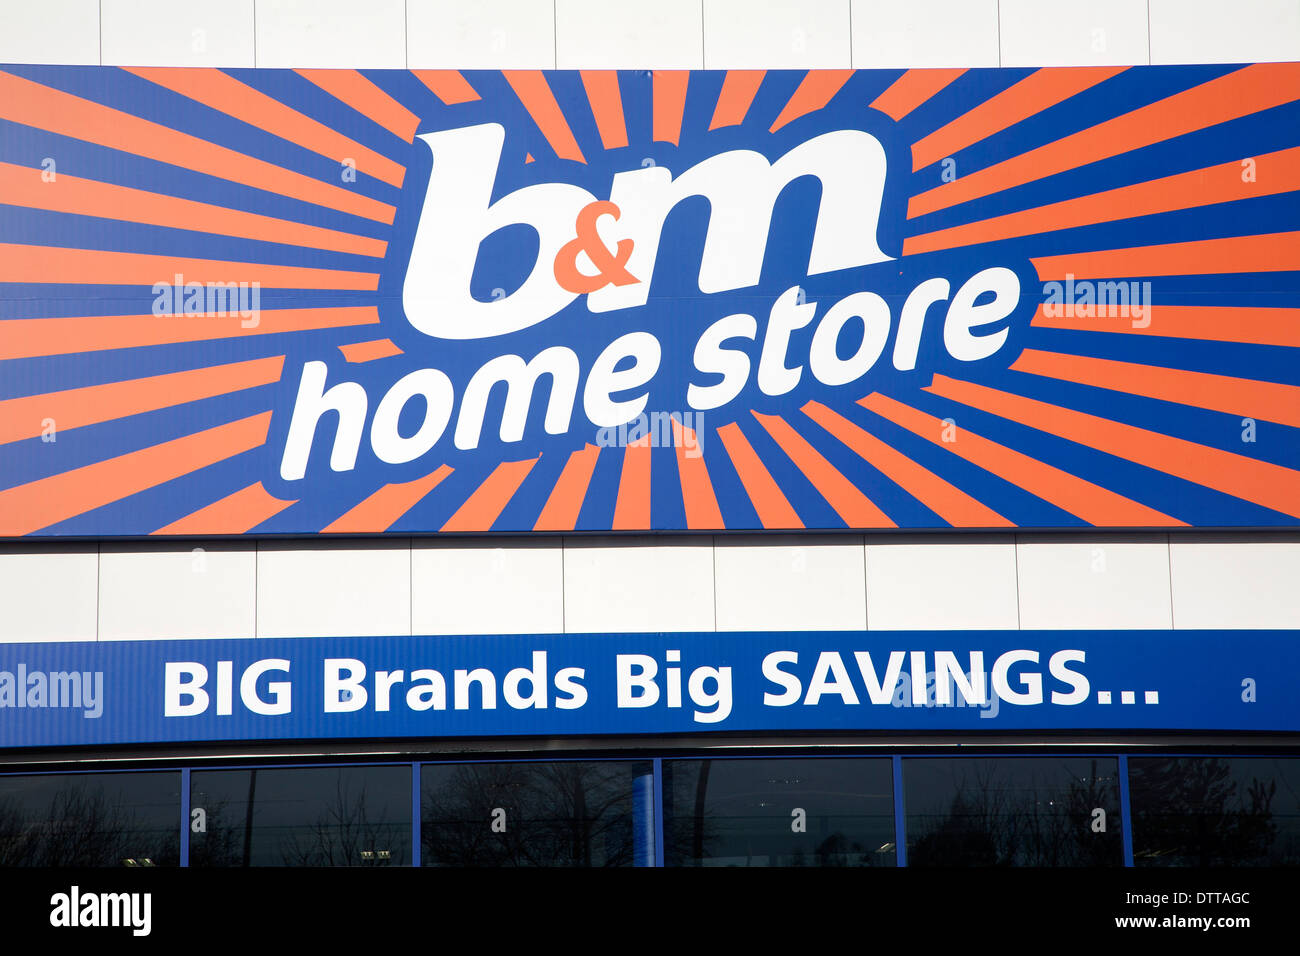 b&m home store sign, Copdock, Ipswich, England offering big brands savings Stock Photo